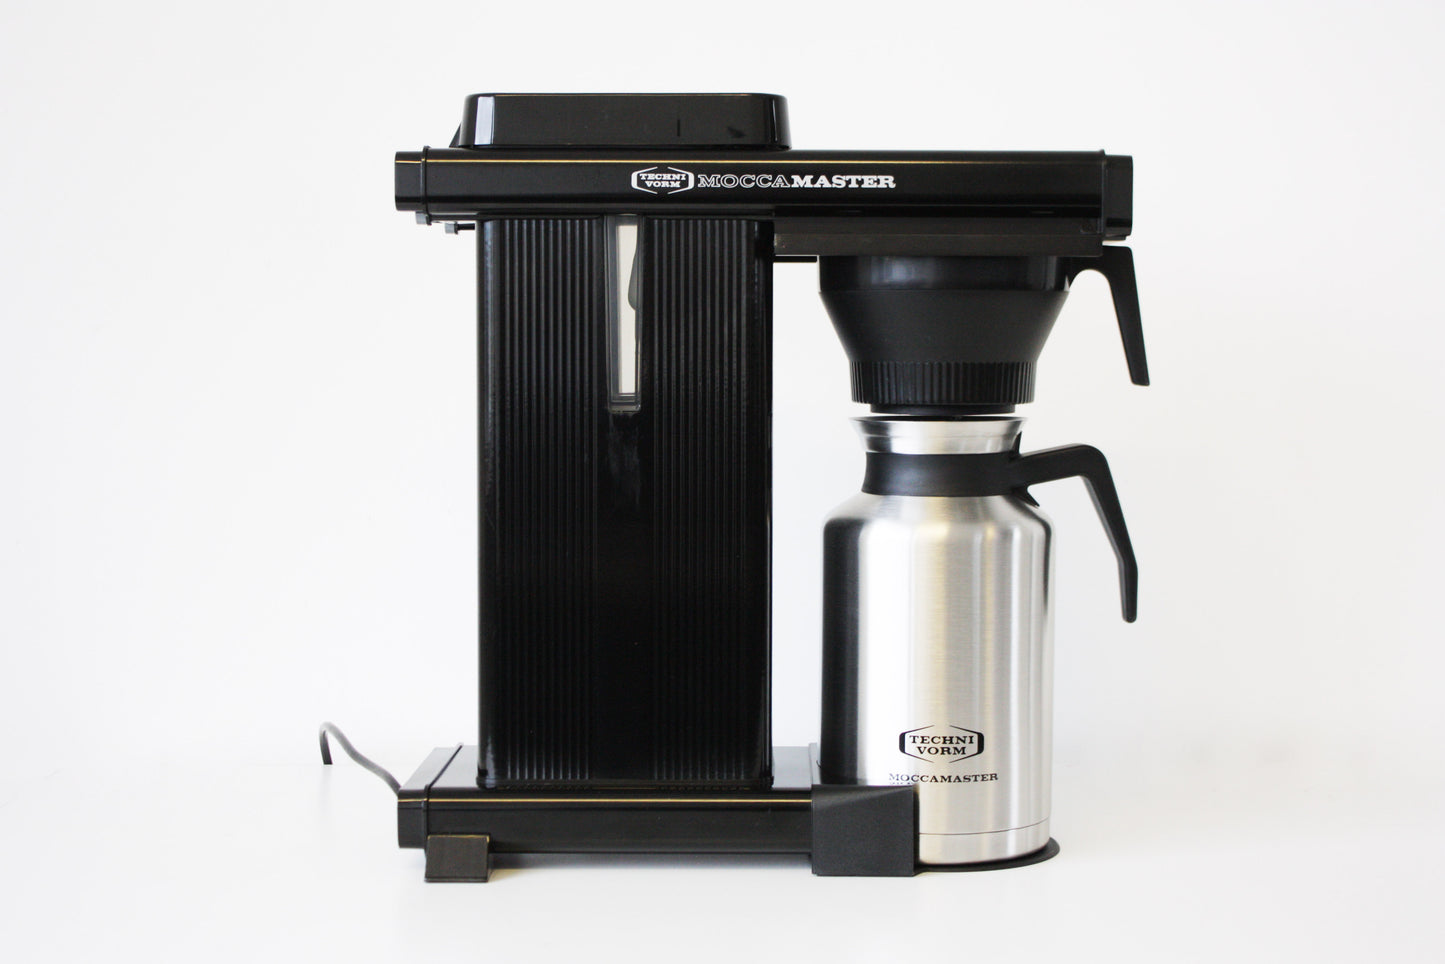 Moccamaster Thermoserve